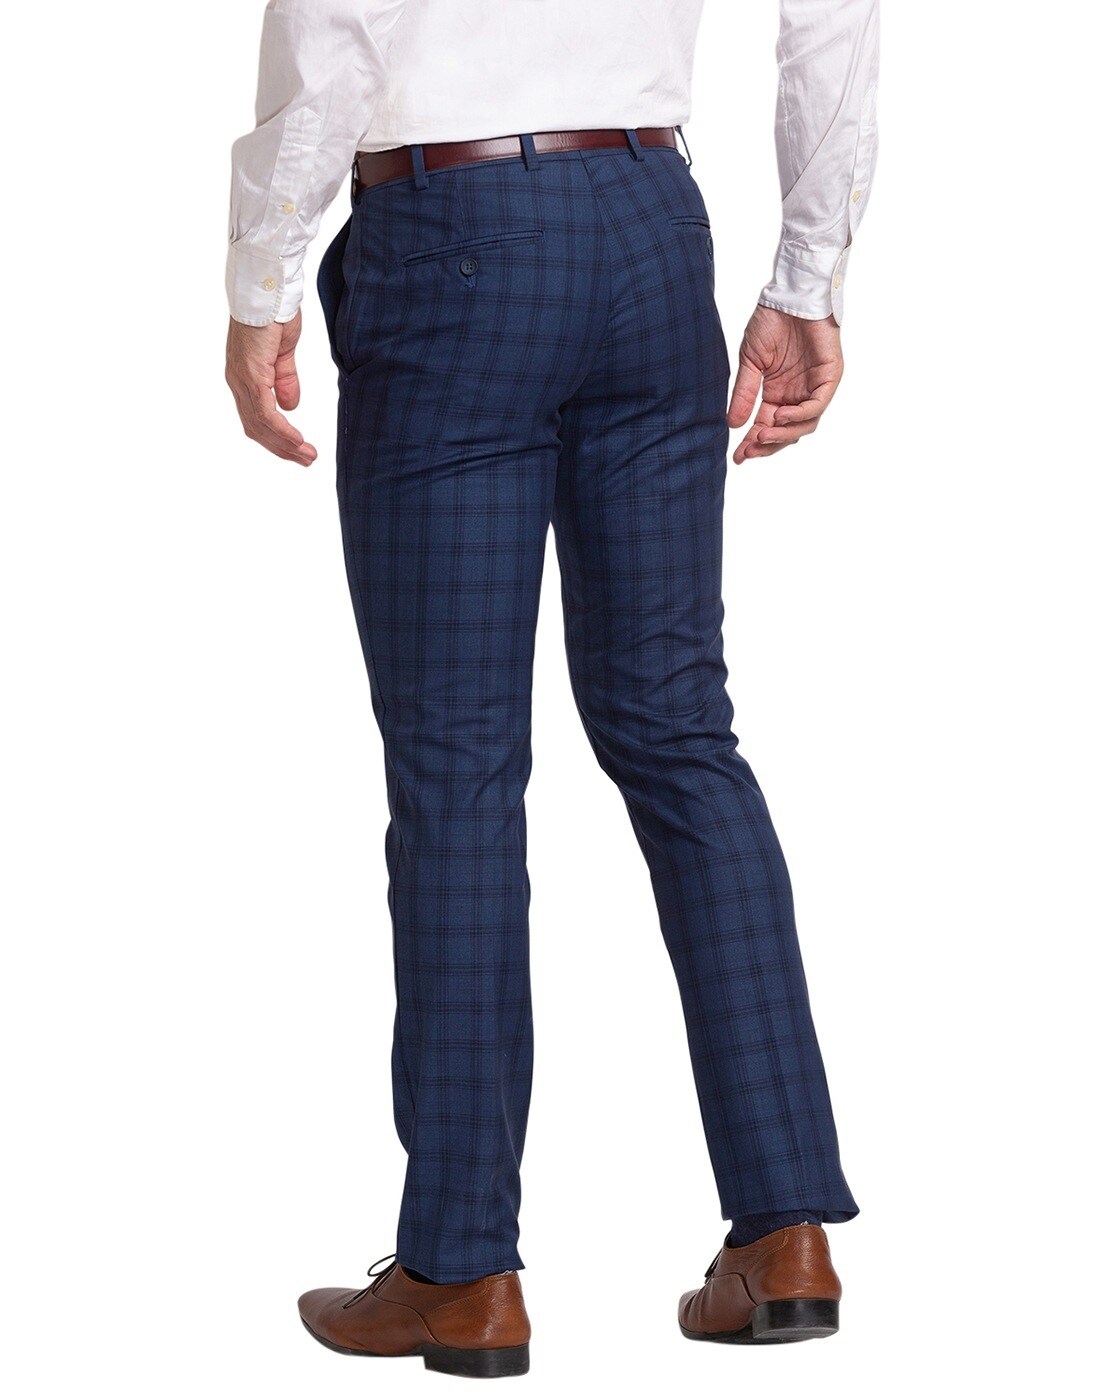 Suit trousers Skinny Fit - Dark blue/Checked - Men | H&M IN